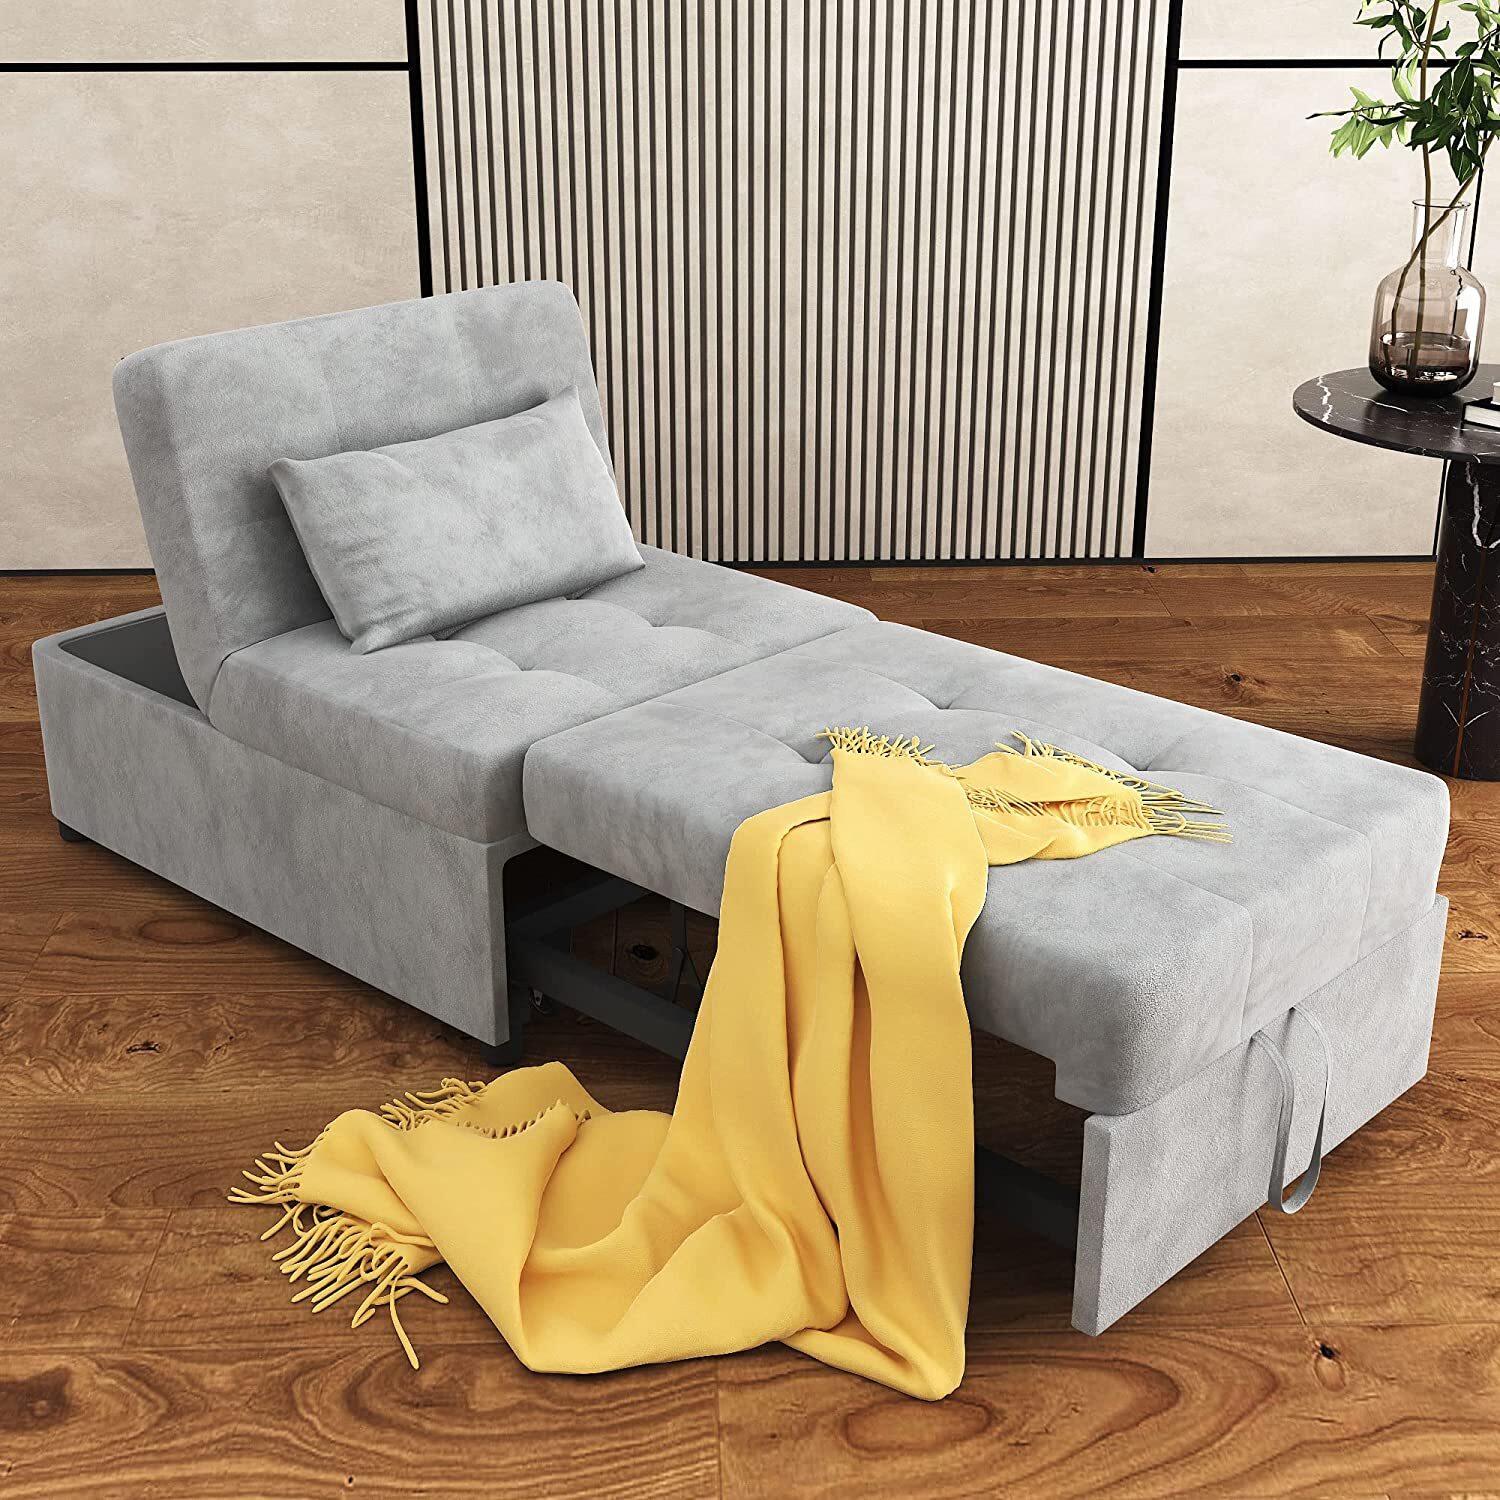 Sofa Bed, Convertible Chair 4in1 Multi-Function Folding Ottoman Breathable Linen Guest Bed with Adjustable Sleeper